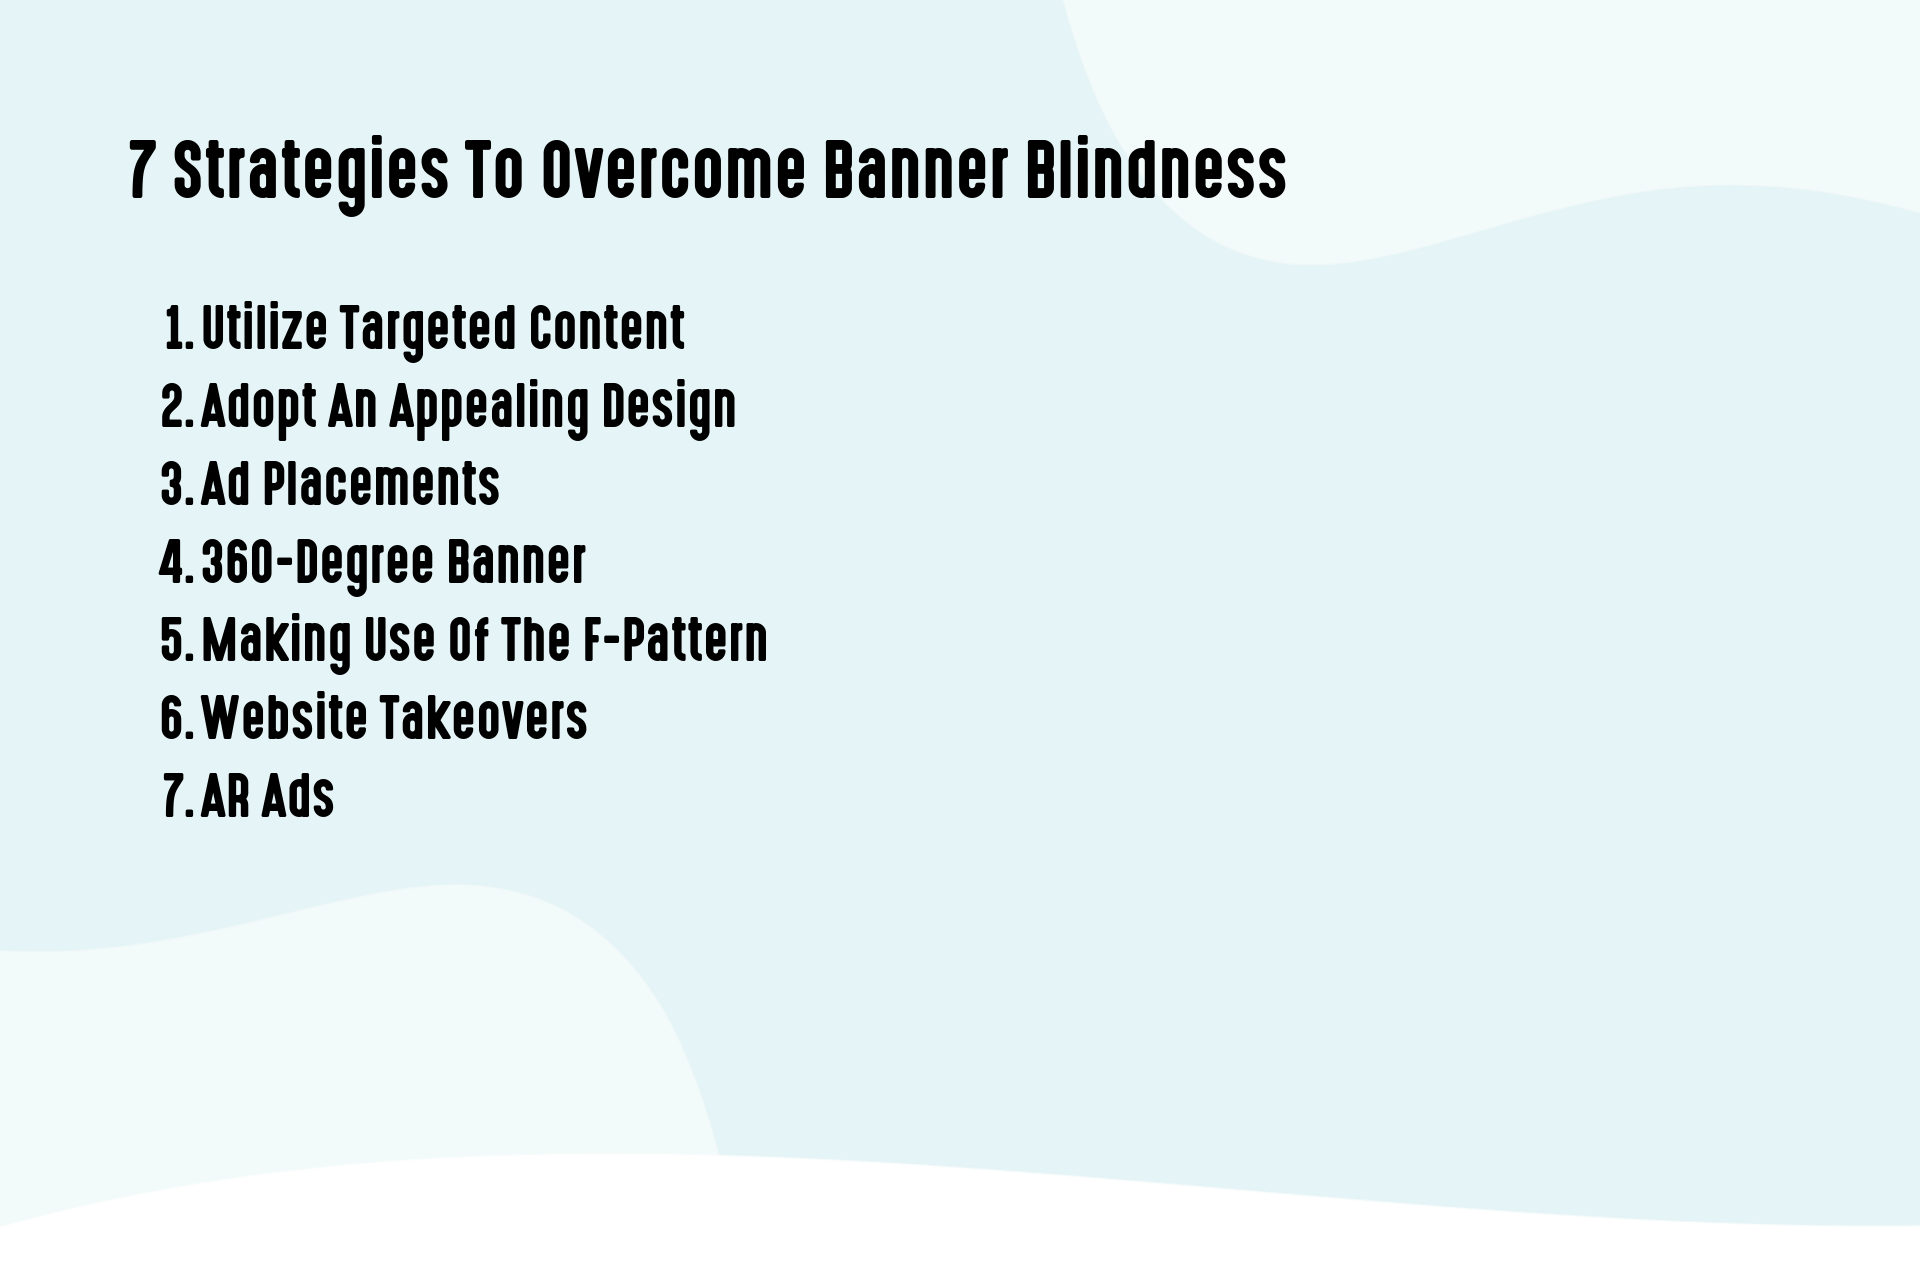 7 Strategies To Overcome Banner Blindness